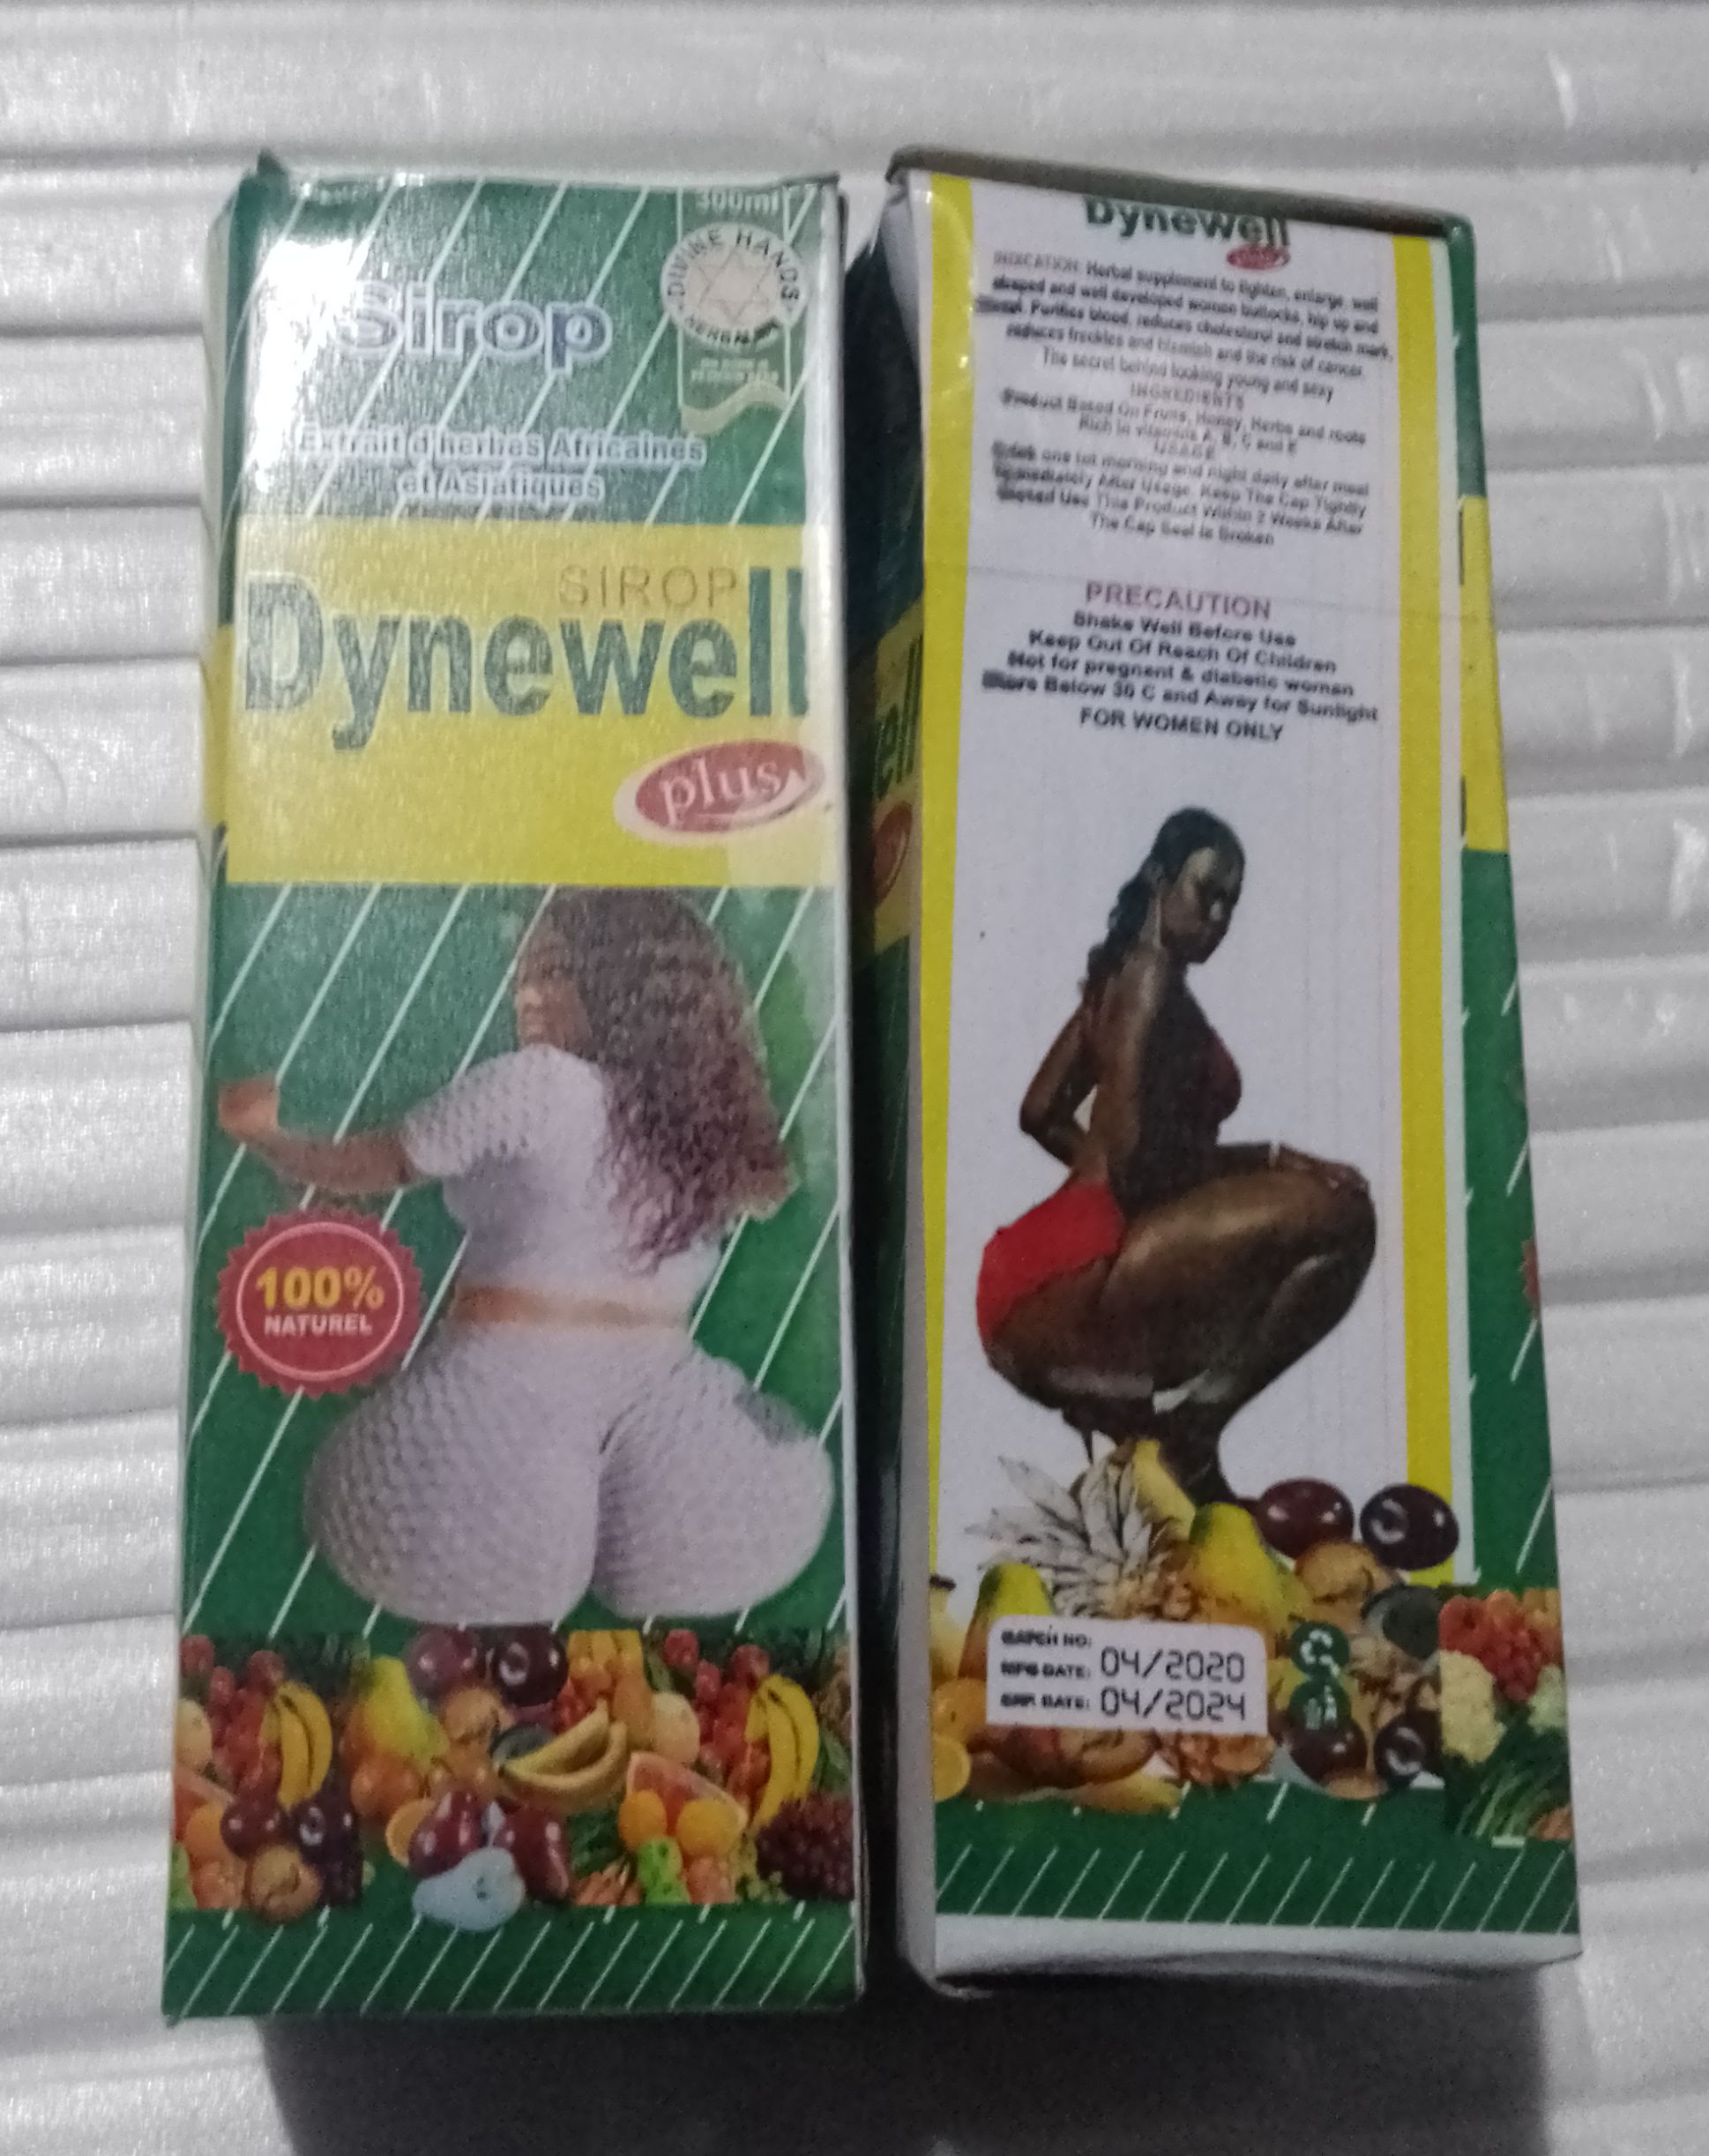 Dynewell Plus Syrup for Weight Gain and Butt and Hips Enlargement and Curves